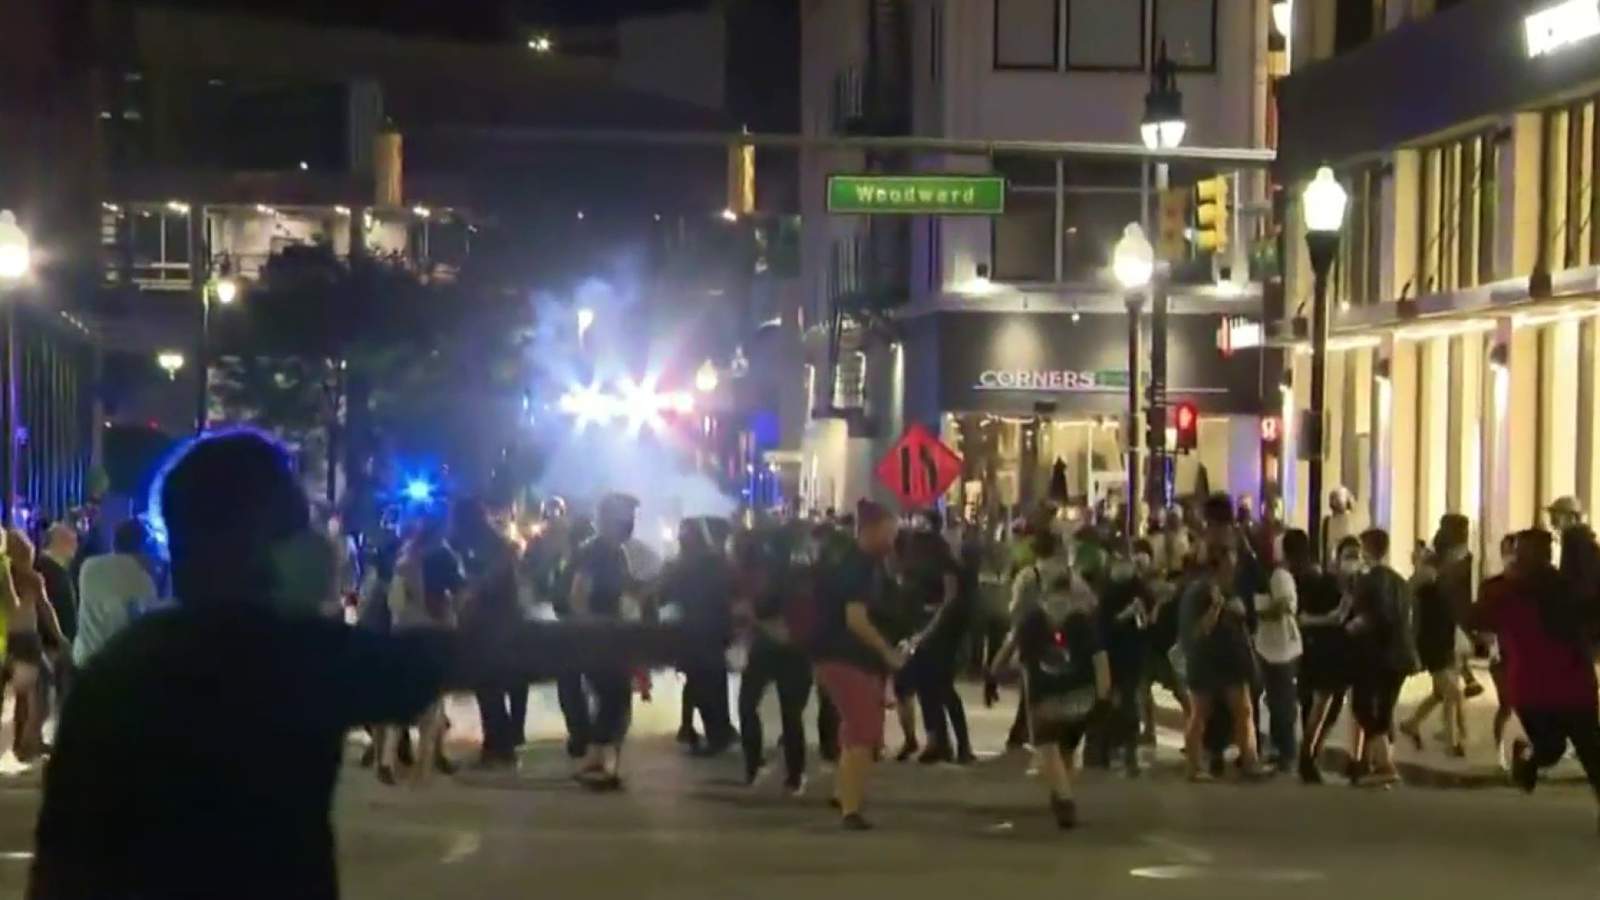 Dozens tear-gassed, arrested on Woodward Avenue amid Downtown Detroit protest